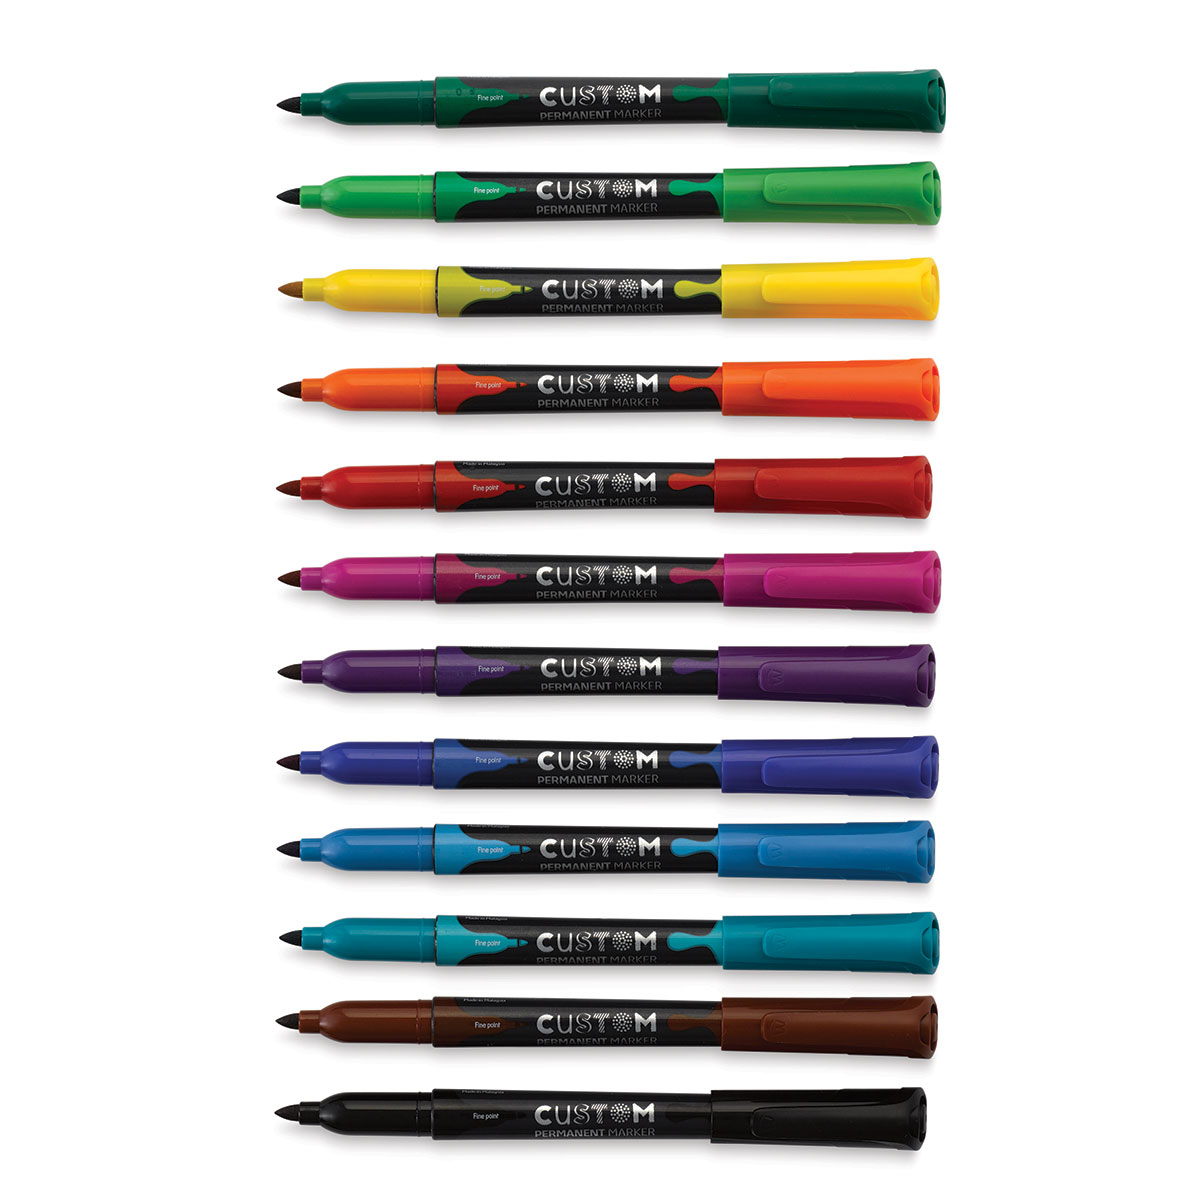 Maped Custom Permanent Markers - Assorted Colors, Set of 12